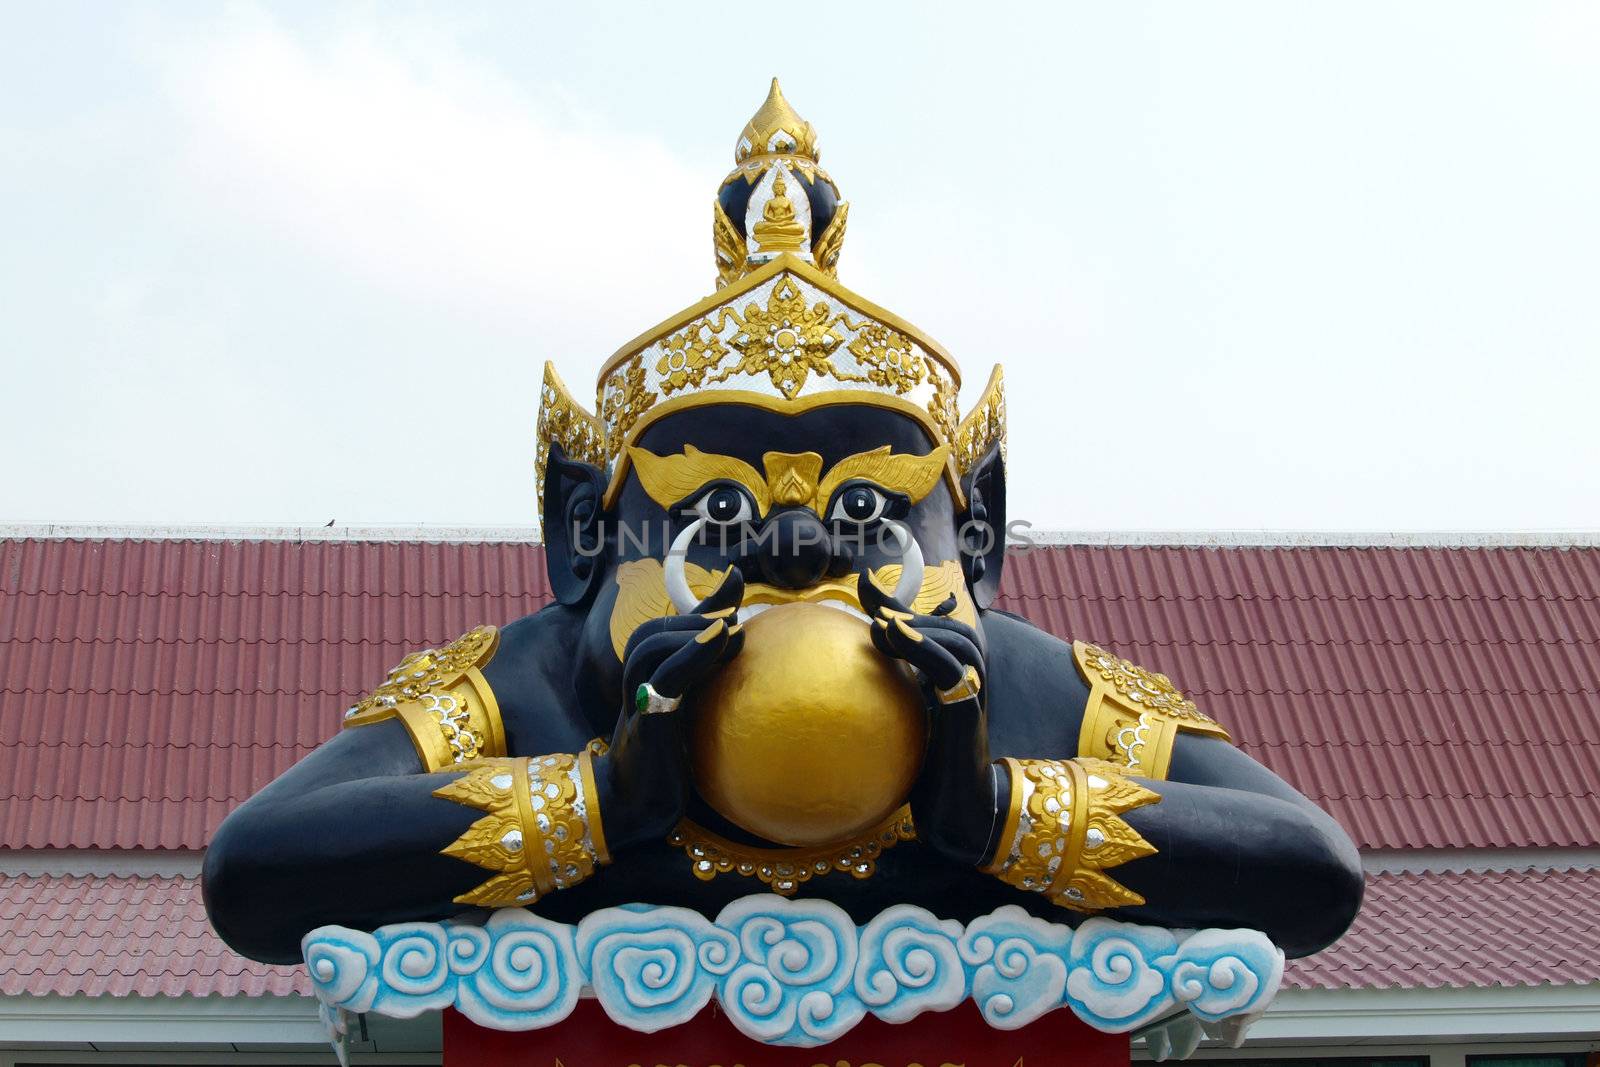 Rahu statue at the temple in Thailand